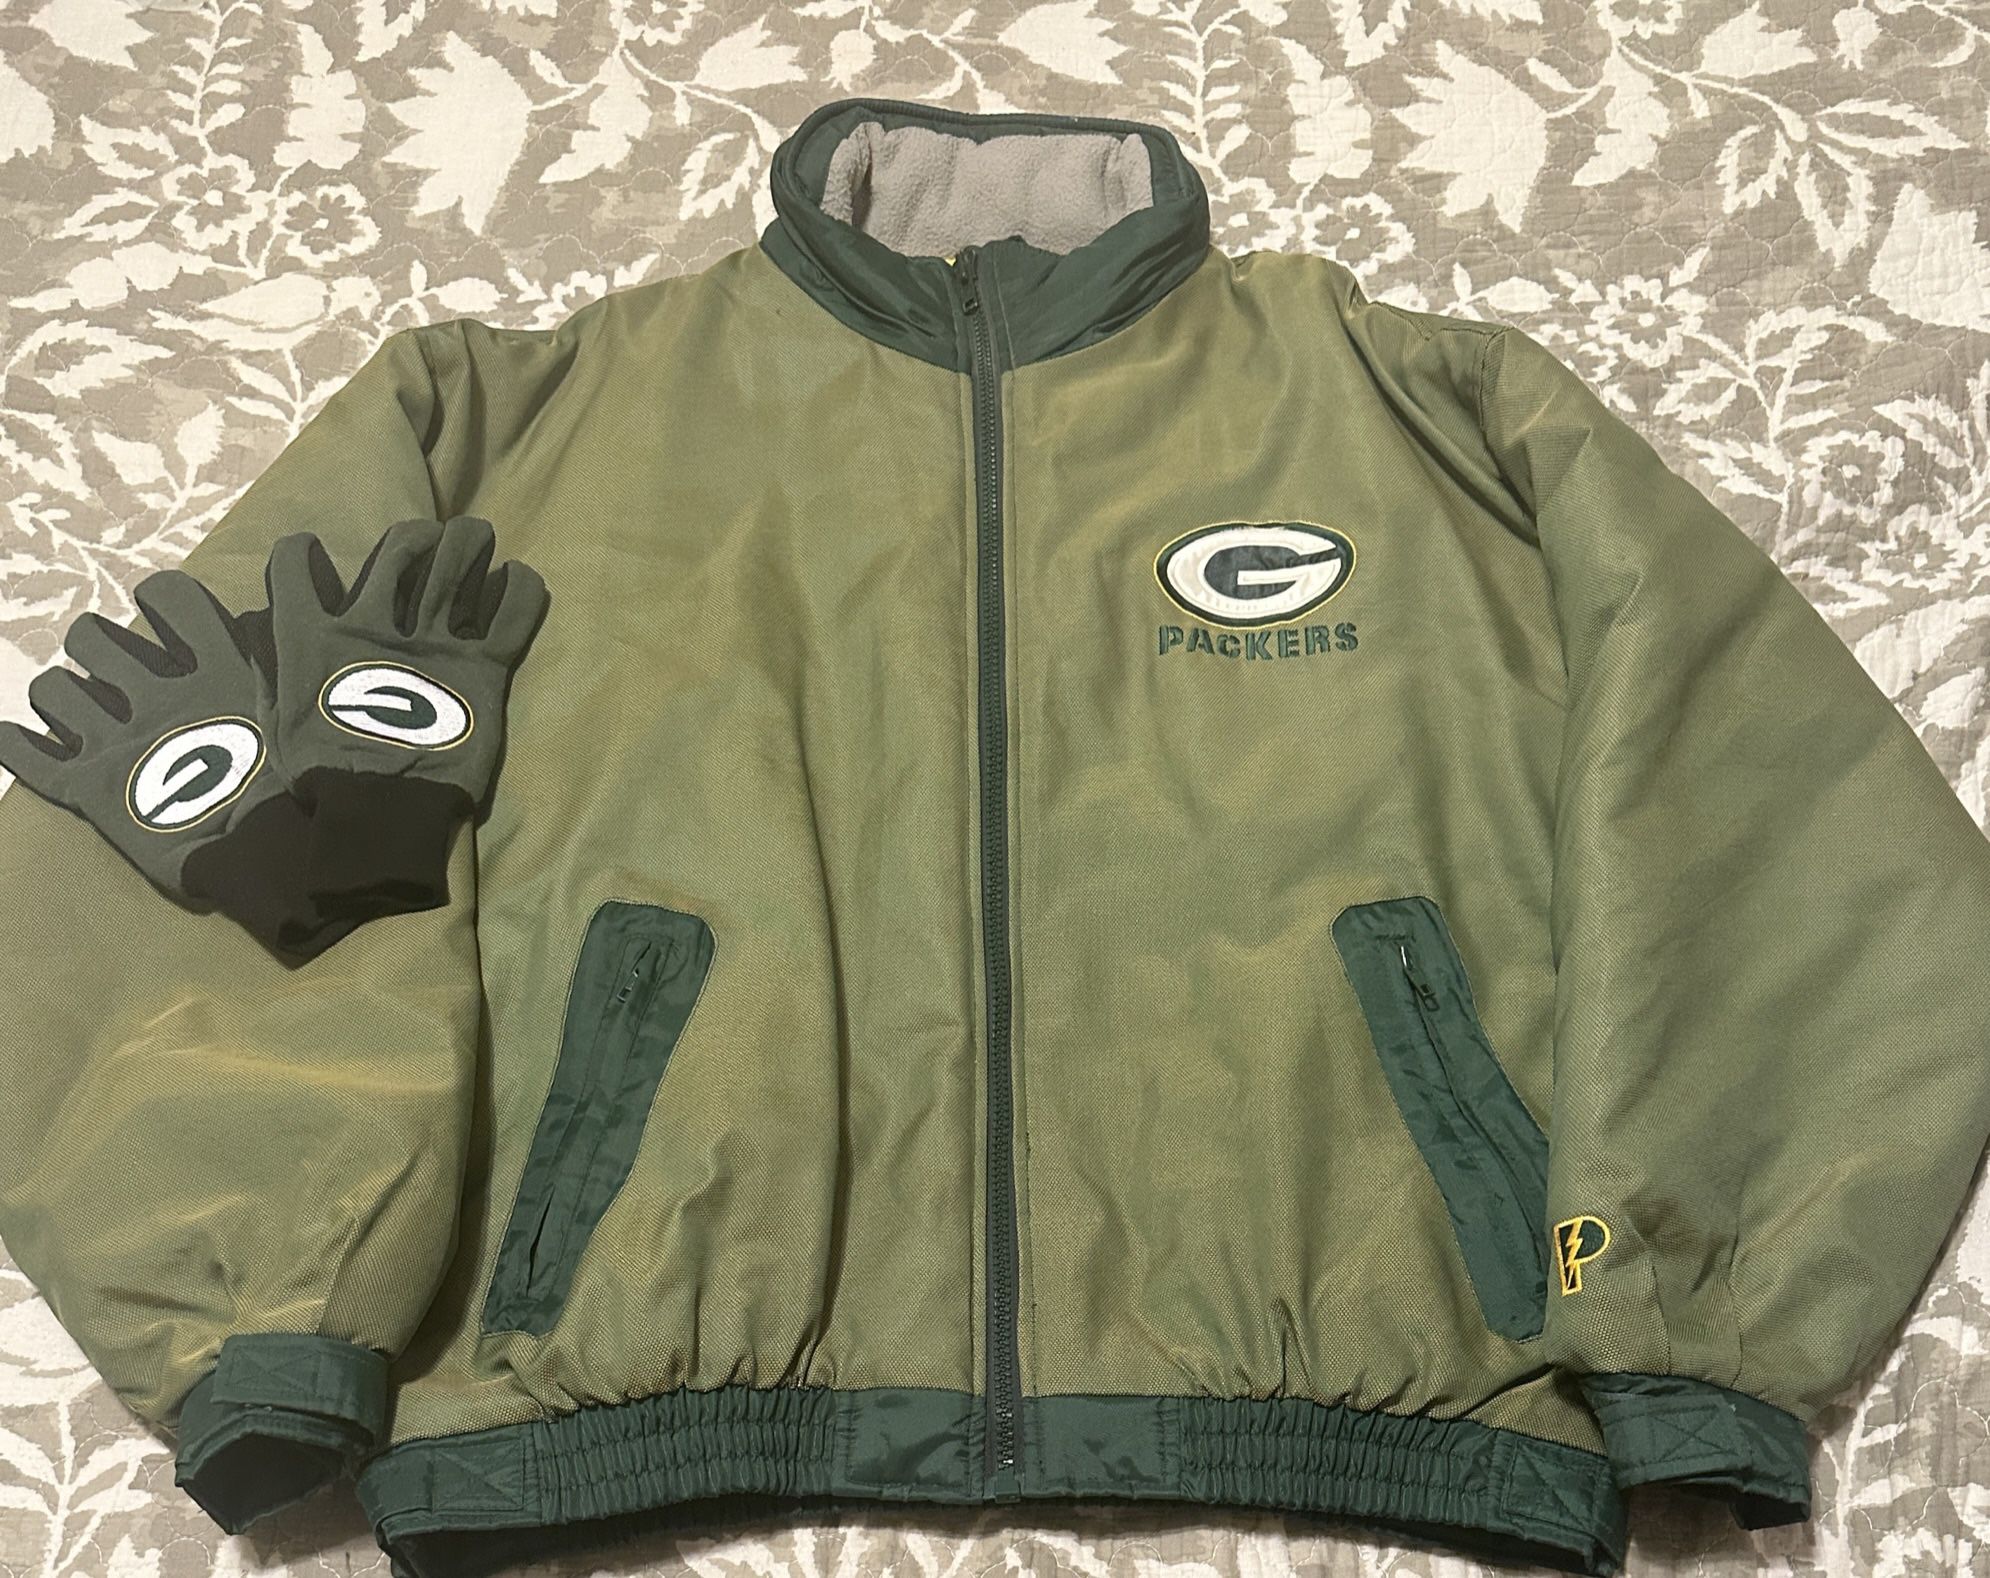 Green Bay Packers NFL Men’s Vintage Pro Player Jacket! Size XL! GUC!